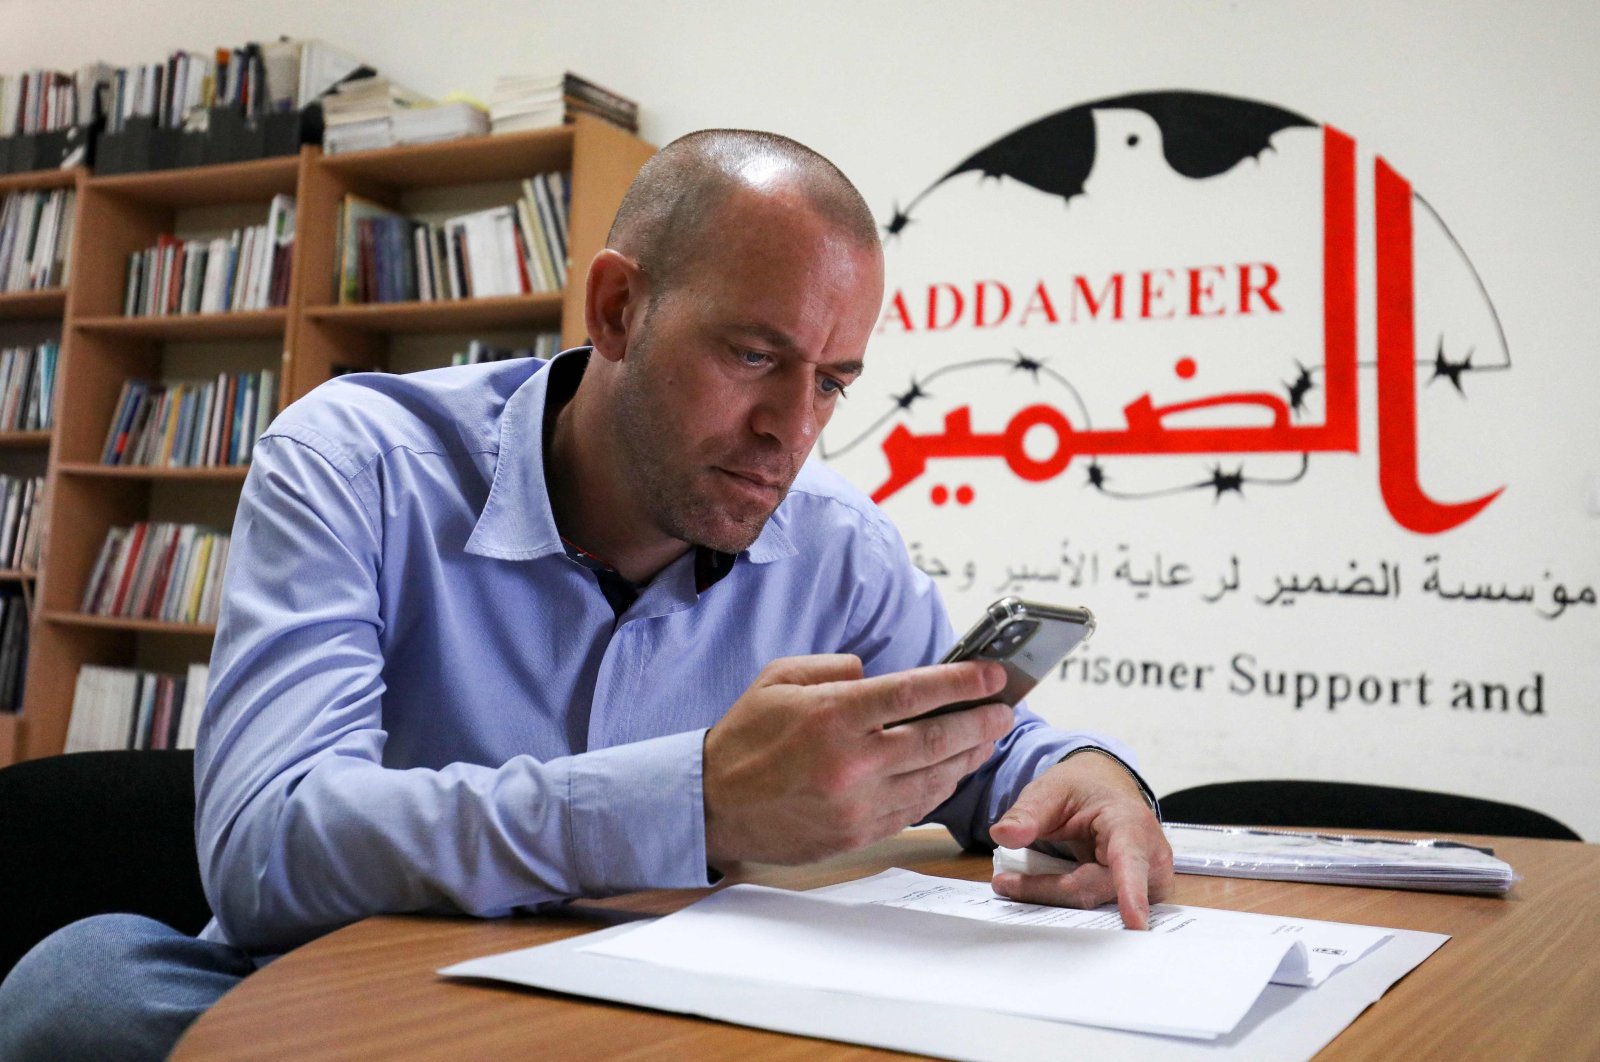 Franco-Palestinian lawyer Salah Hammouri works at his office in Ramallah, occupied West Bank, Palestine, Oct. 1, 2020. (AFP Photo)